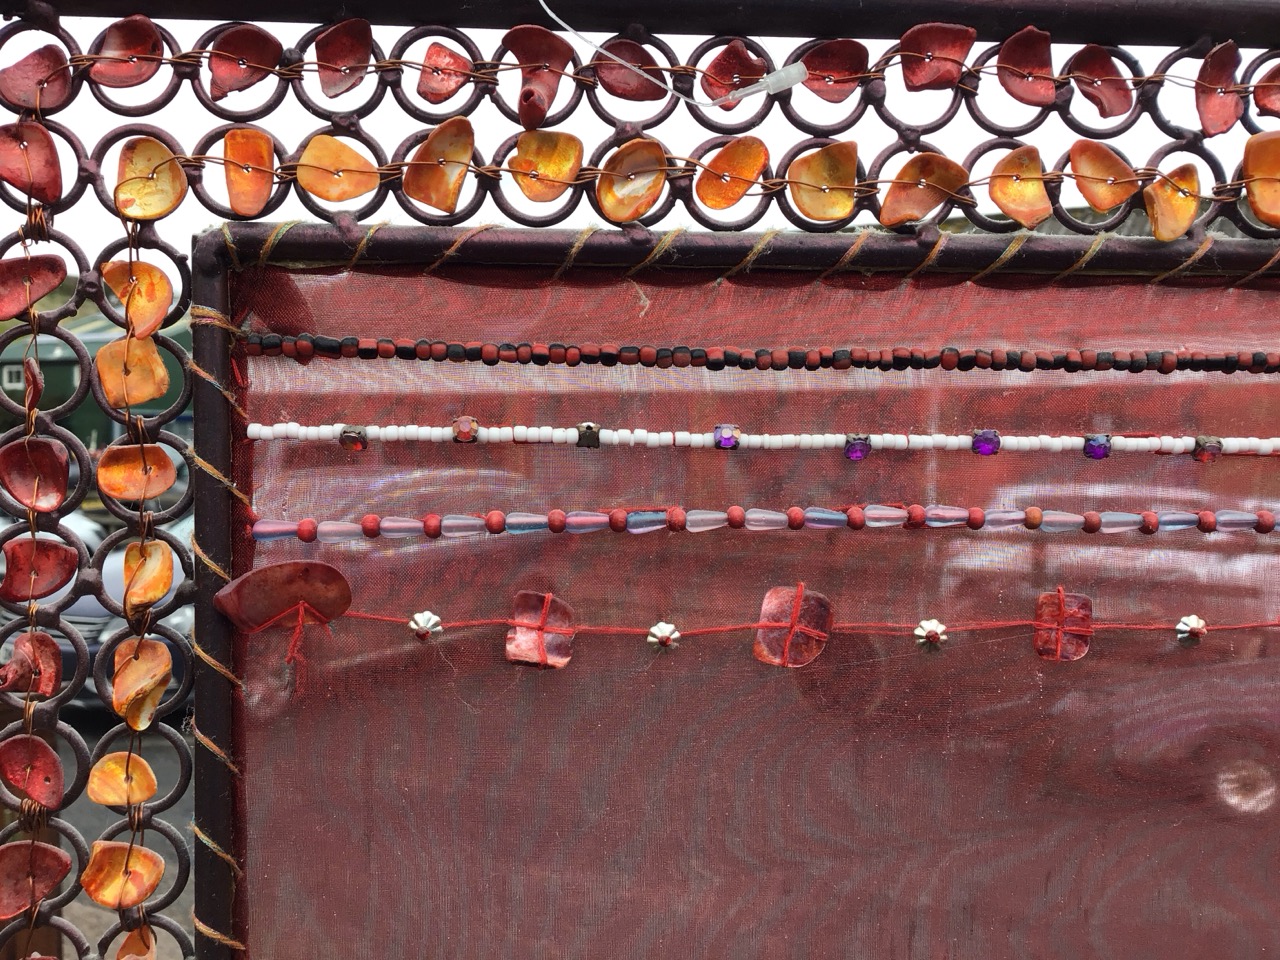 An Indian three-fold wrought iron screen with organza panels embroidered with stars and beaded bands - Image 2 of 3